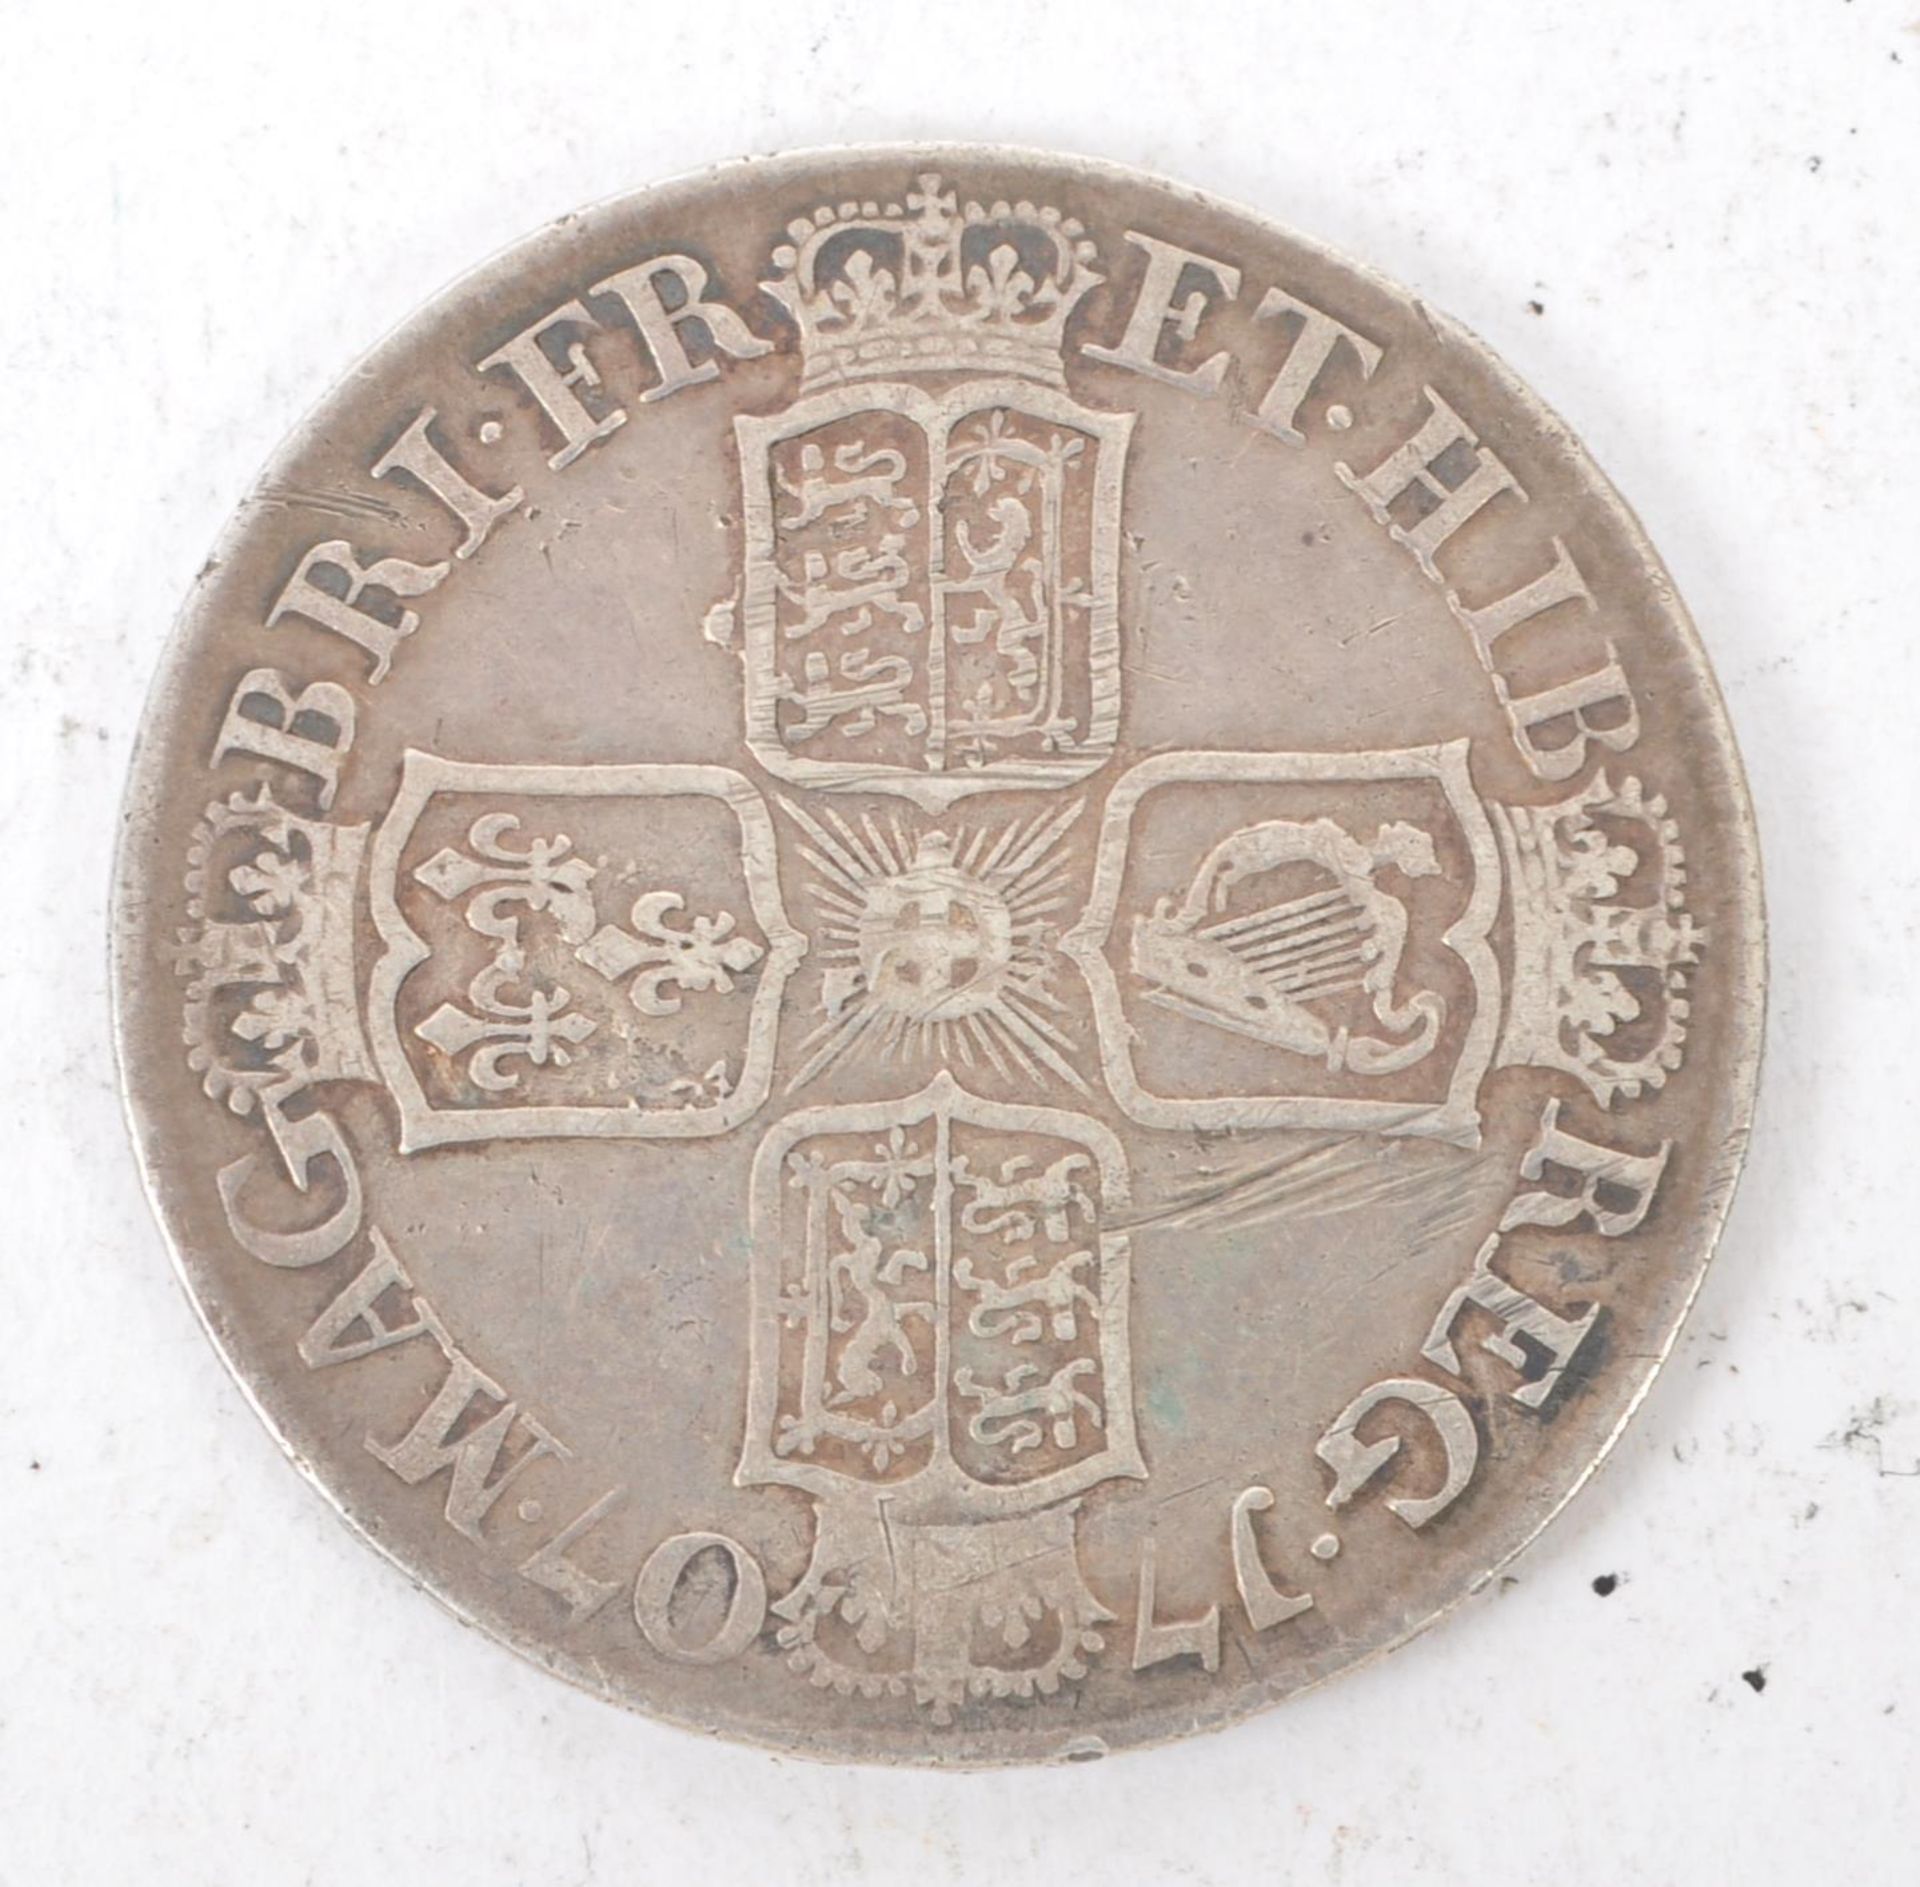 QUEEN ANNE 1707 SILVER HALF CROWN COIN - Image 2 of 2